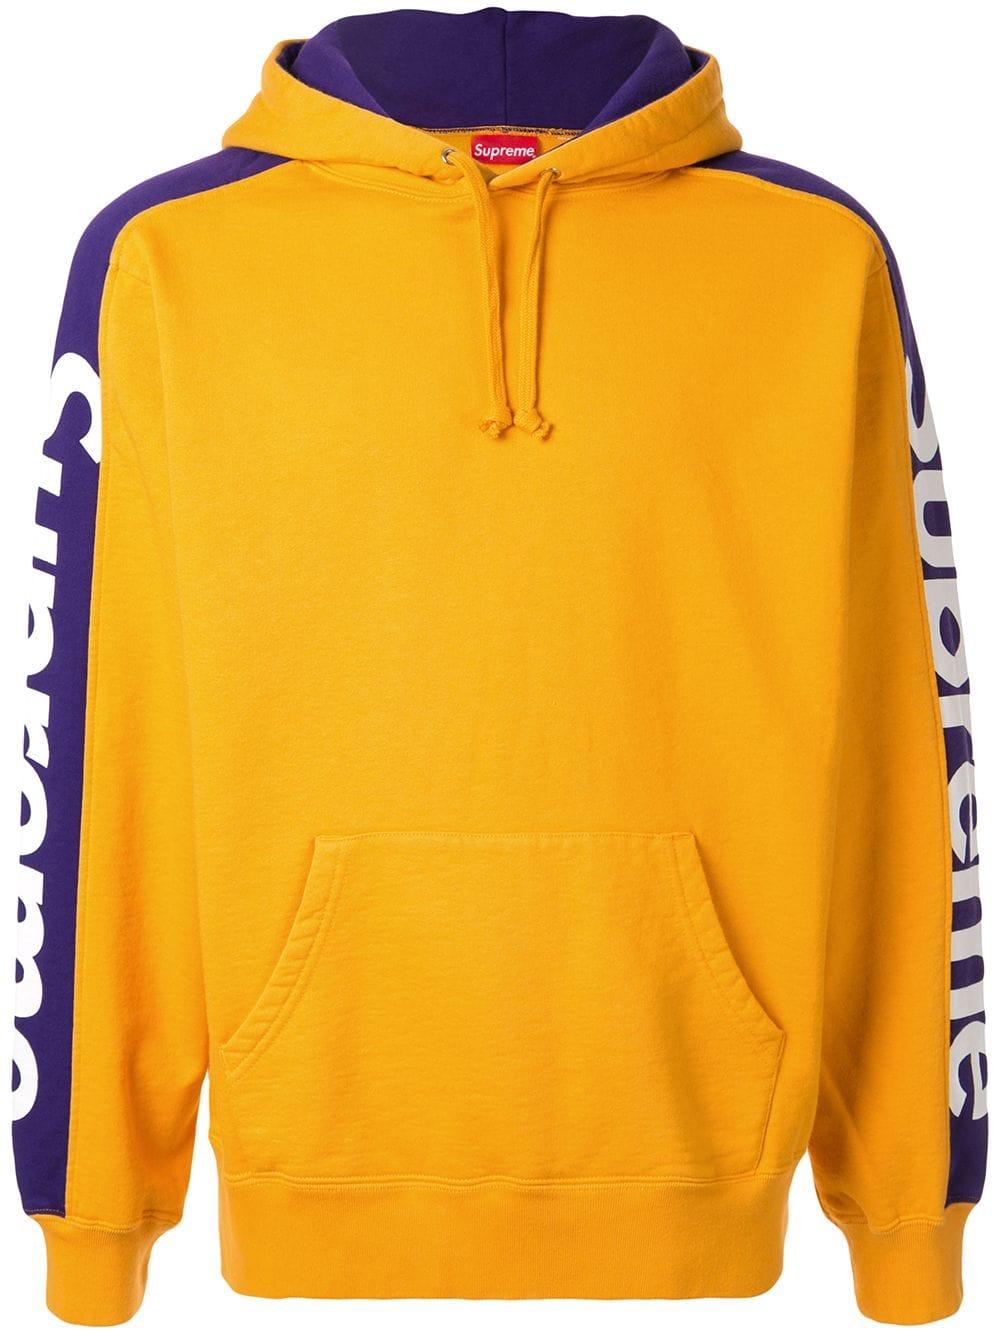 Supreme Cotton Sideline Hoodie in Yellow for Men - Lyst